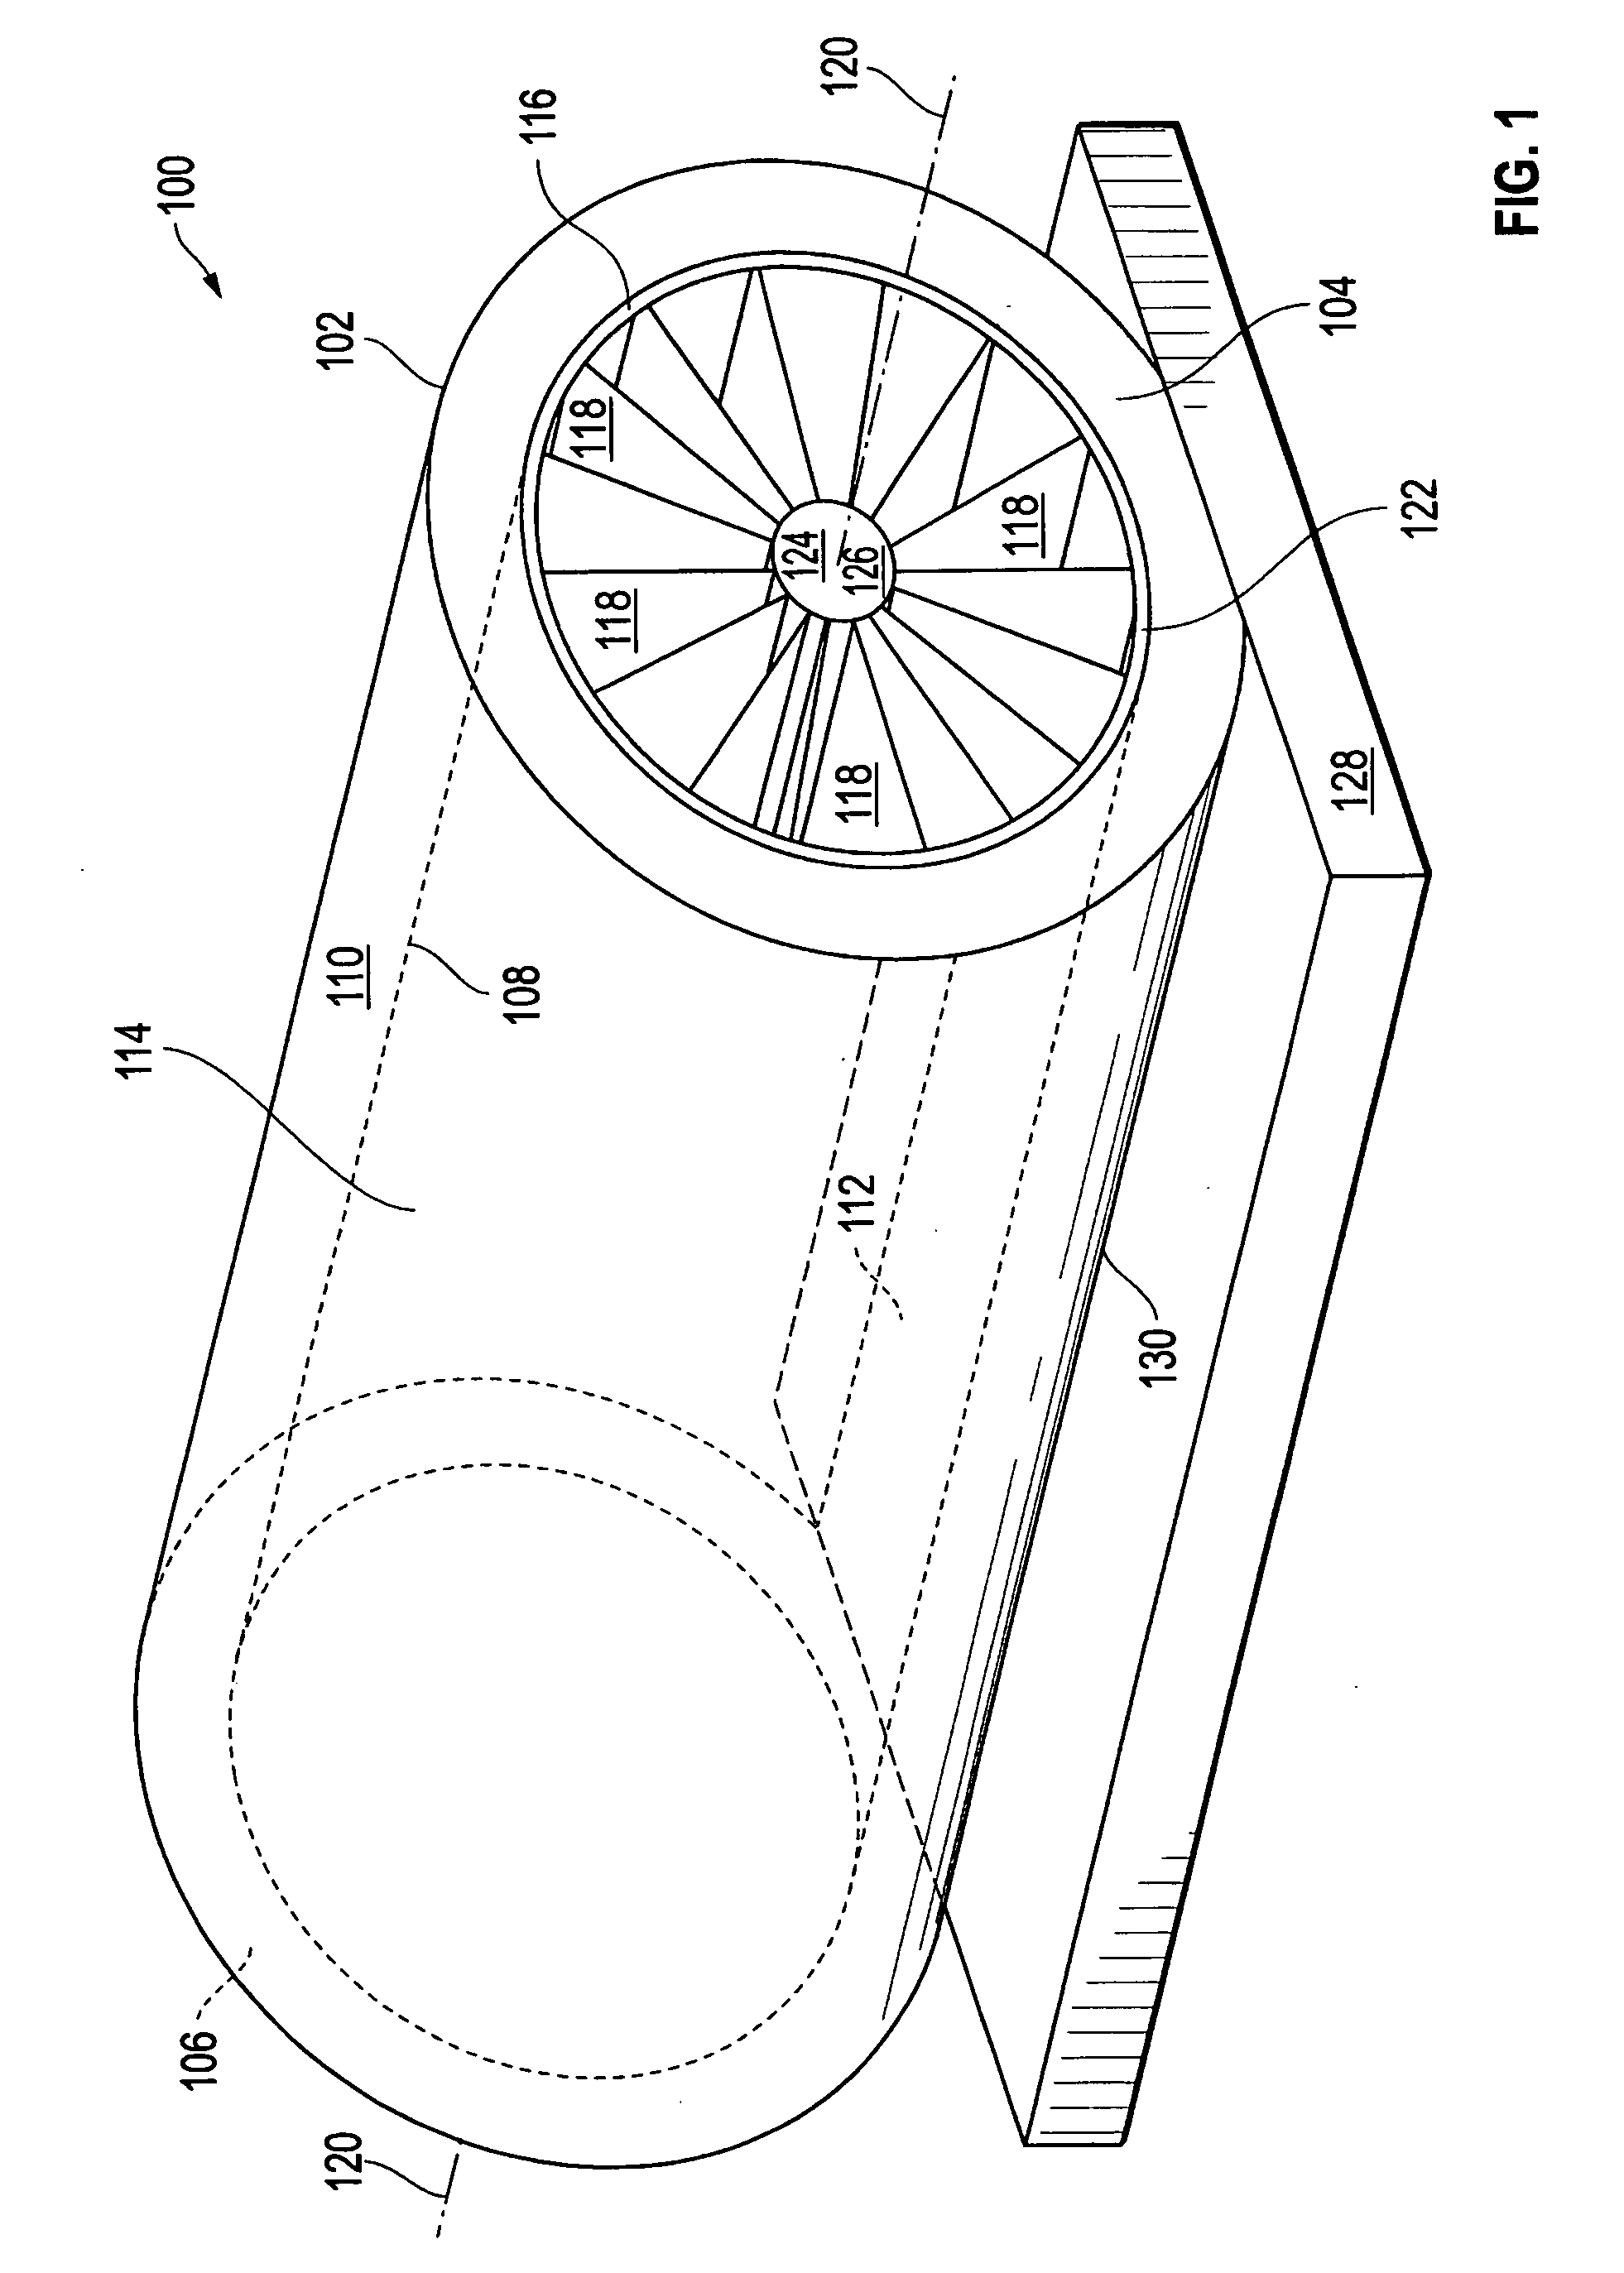 Heat sink for distributing a thermal load